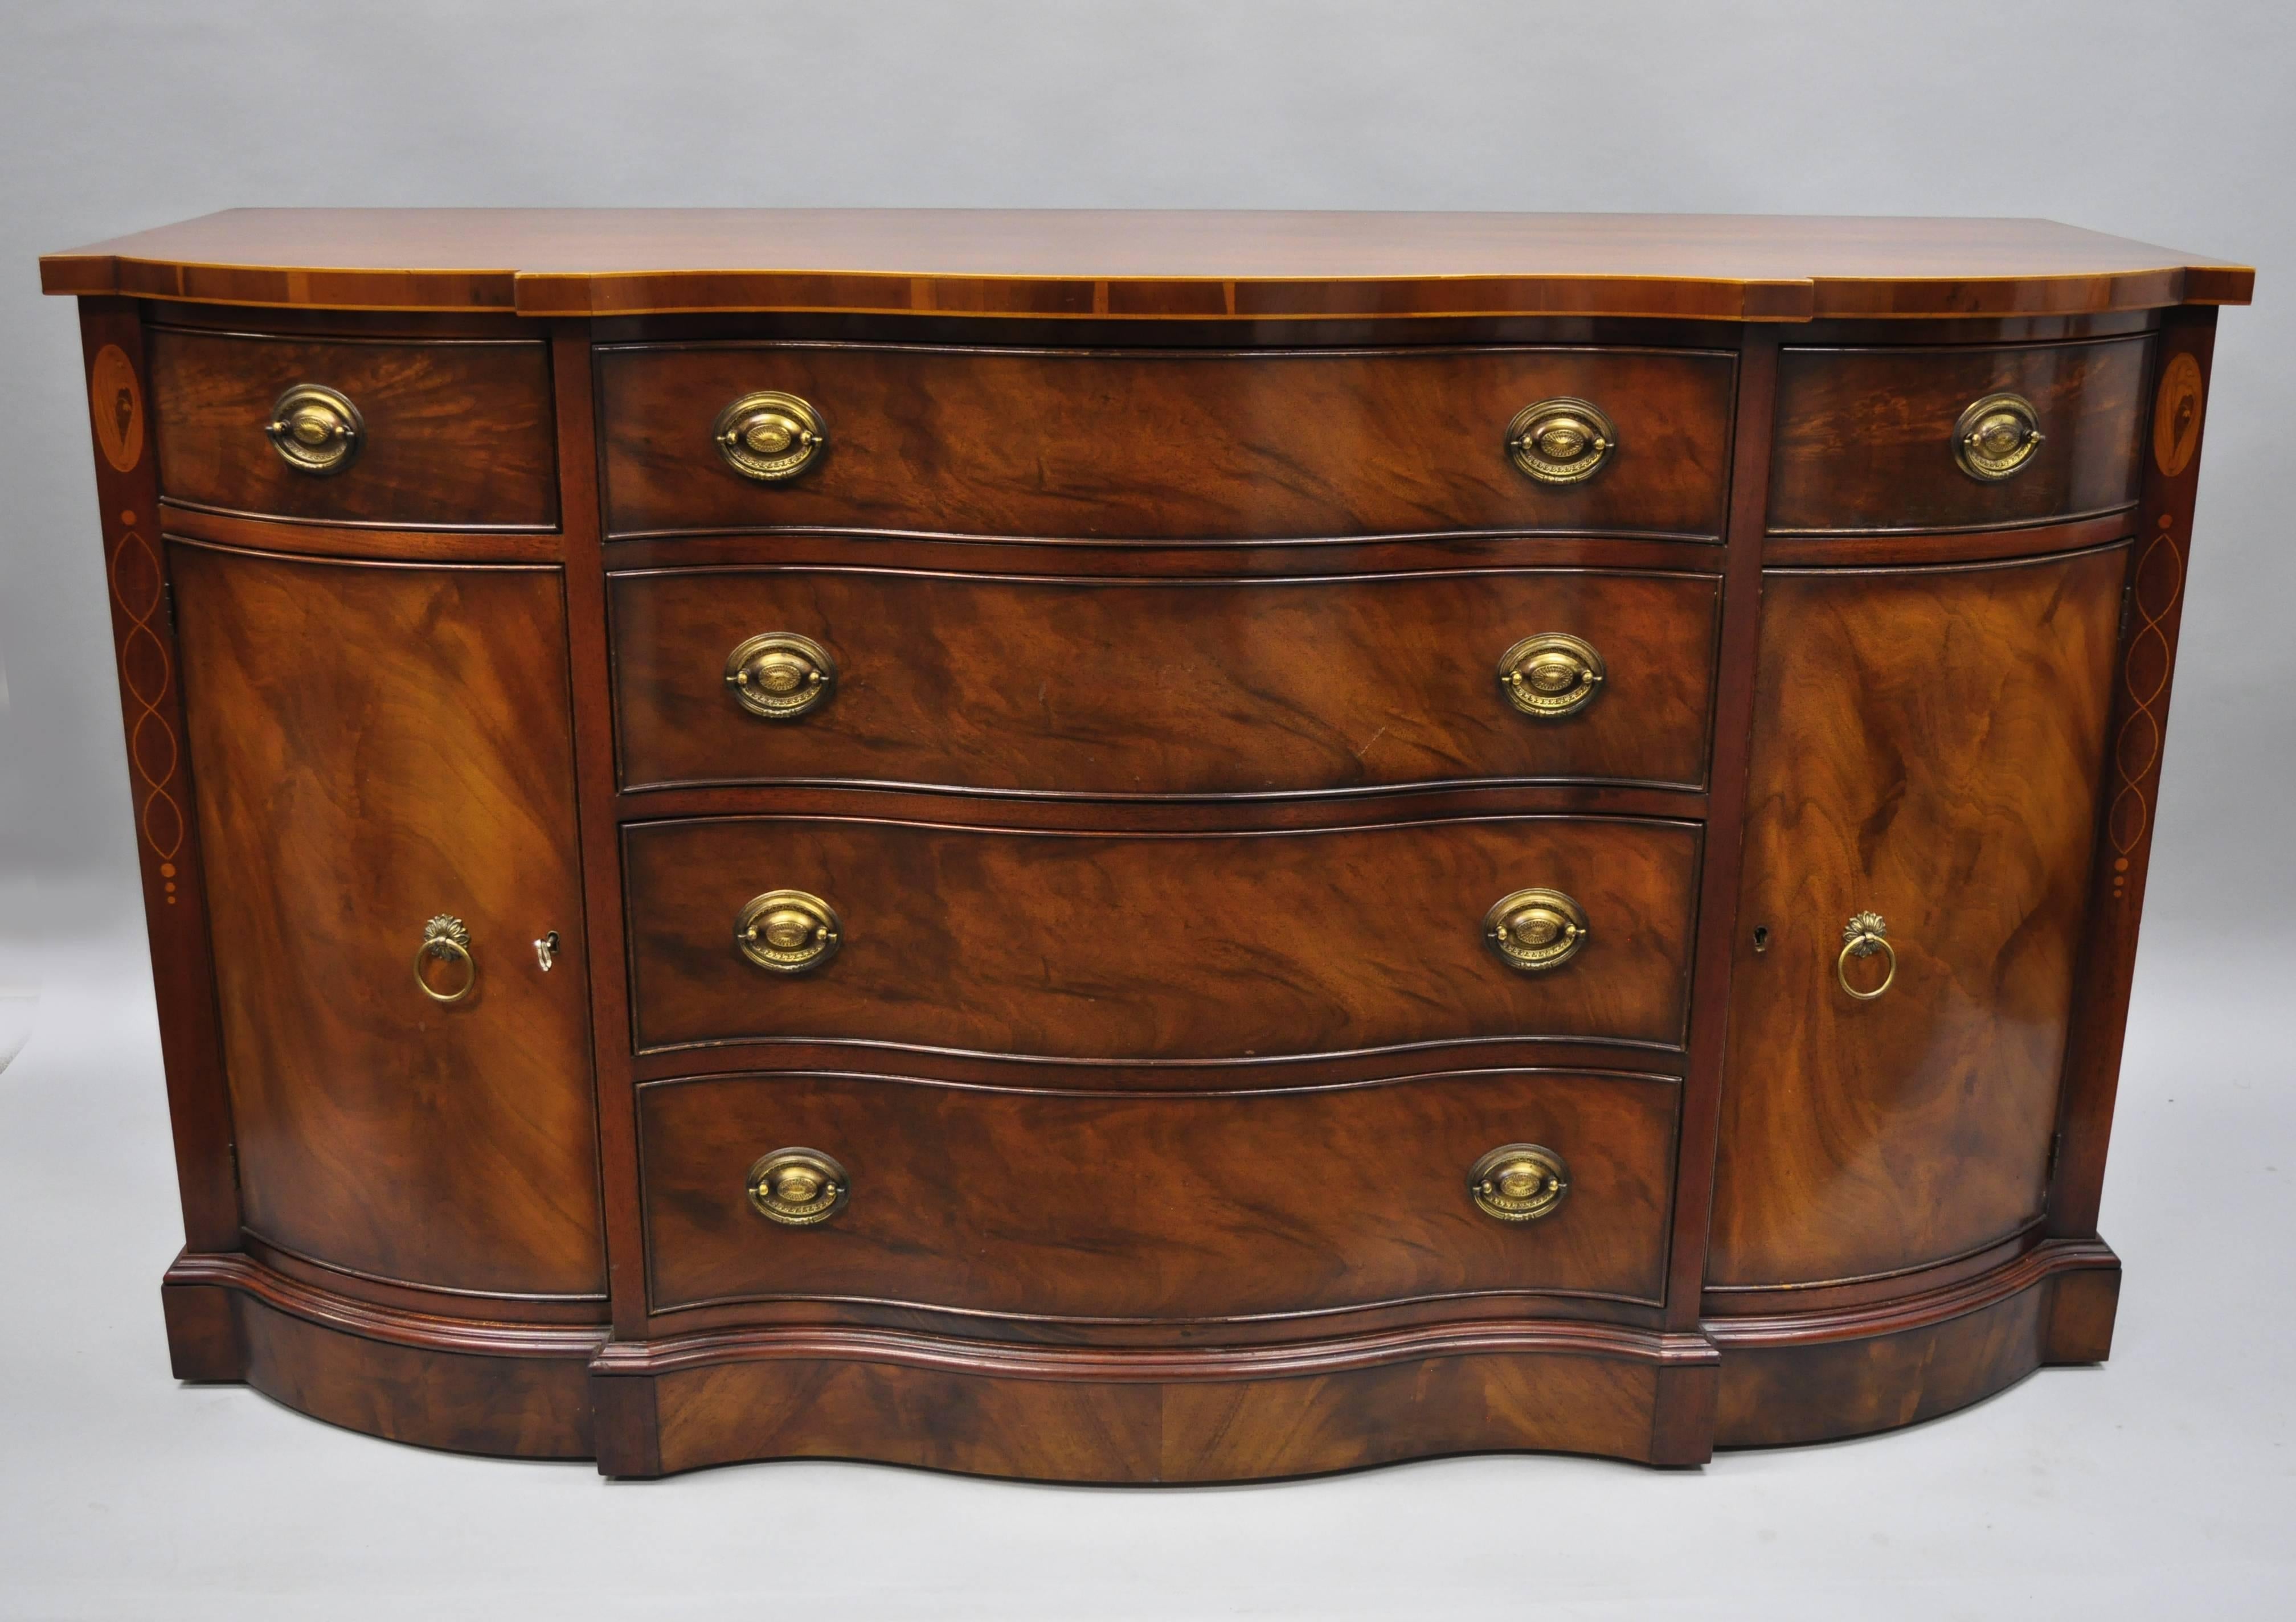 Drexel Wallace Nutting Serpentine Front Mahogany Sideboard Server Buffet 7